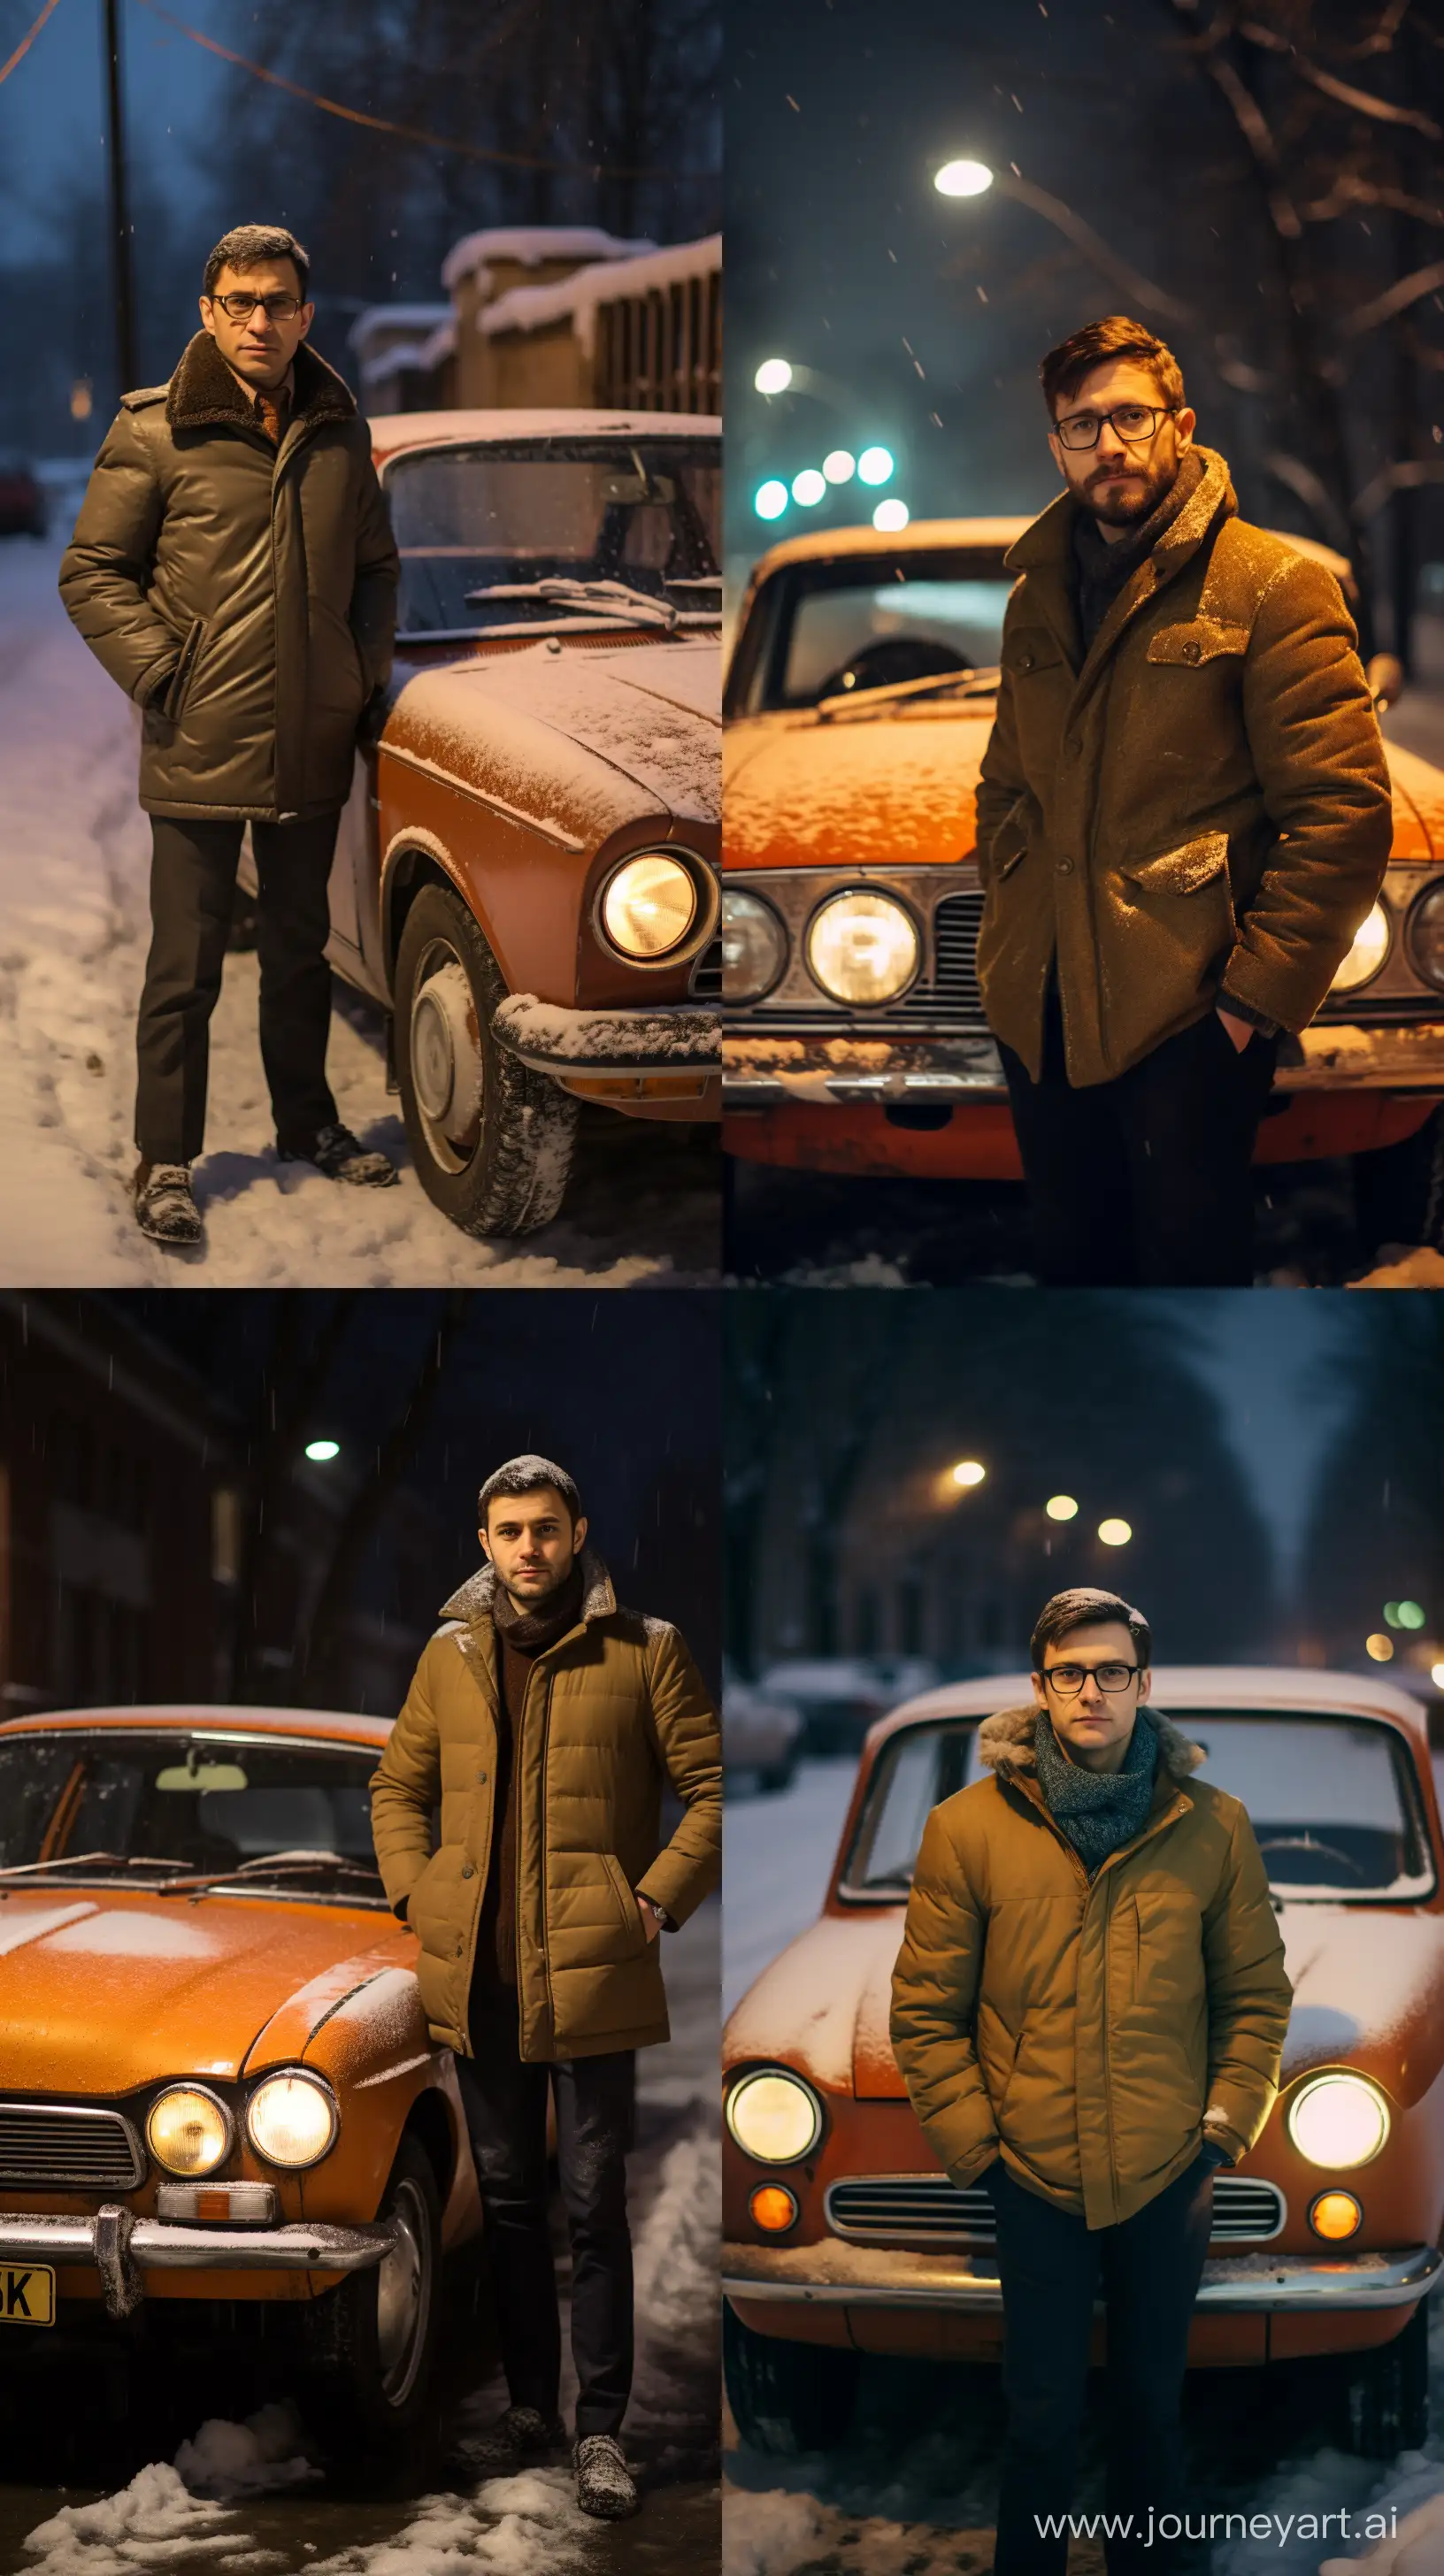 A man with brown hair, in the 60s and 70s of the USSR, stylishly dressed, standing next to a car Ваз 2101, it's snowing in winter, the lights are on in the evening,man aged 40, Canon EOS 5D Mark IV DSLR, f/8 aperture, 1/125 second shutter speed, ISO 800, professional lighting setup, Adobe Photoshop, attention to detail::3 --ar 9:16